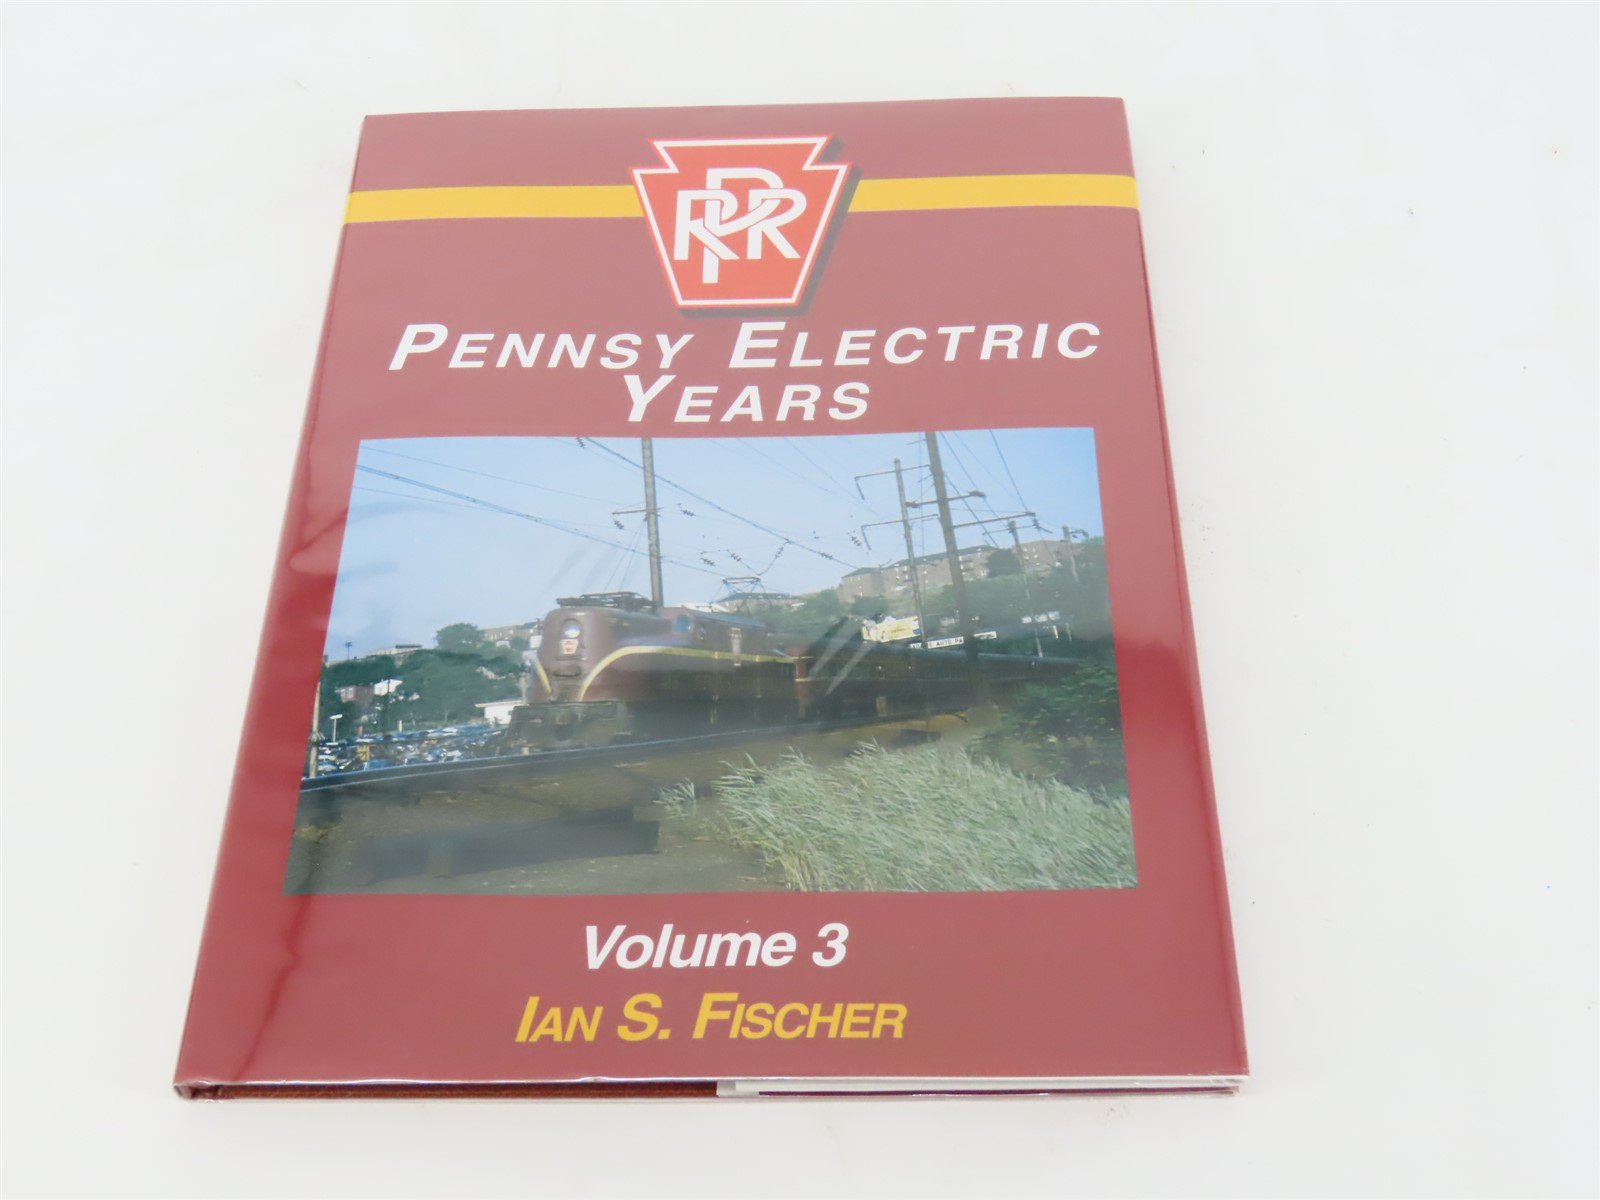 Morning Sun: Pennsy Electric Years Volume 3 by Ian S. Fischer ©2005 HC Book